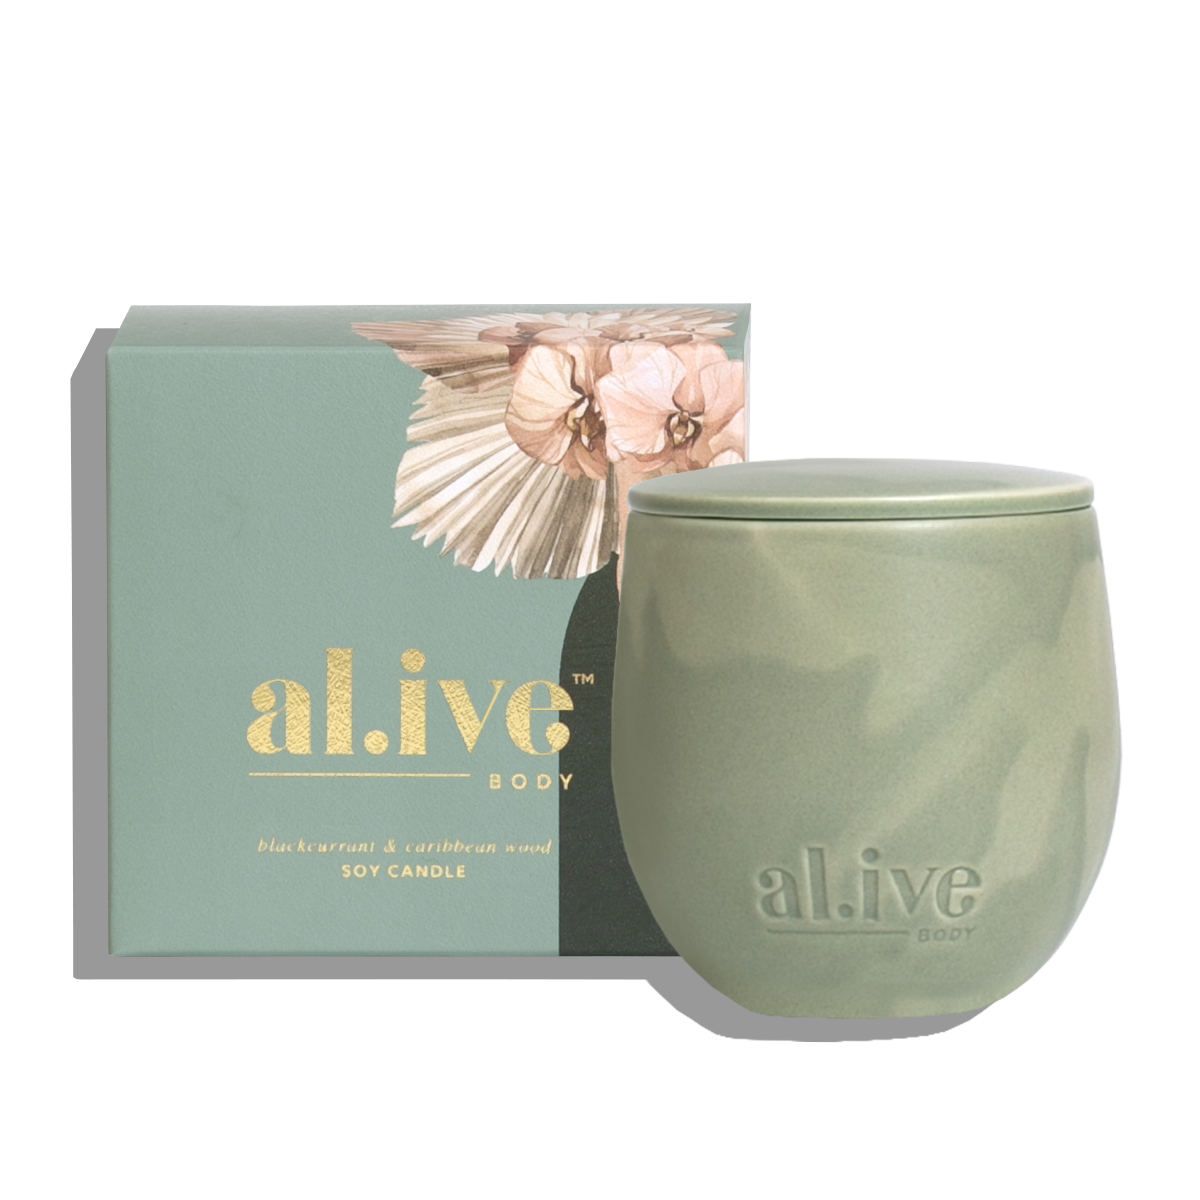 Alive Blackcurrant & Caribbean Wood Soy Candle  - Green 295g